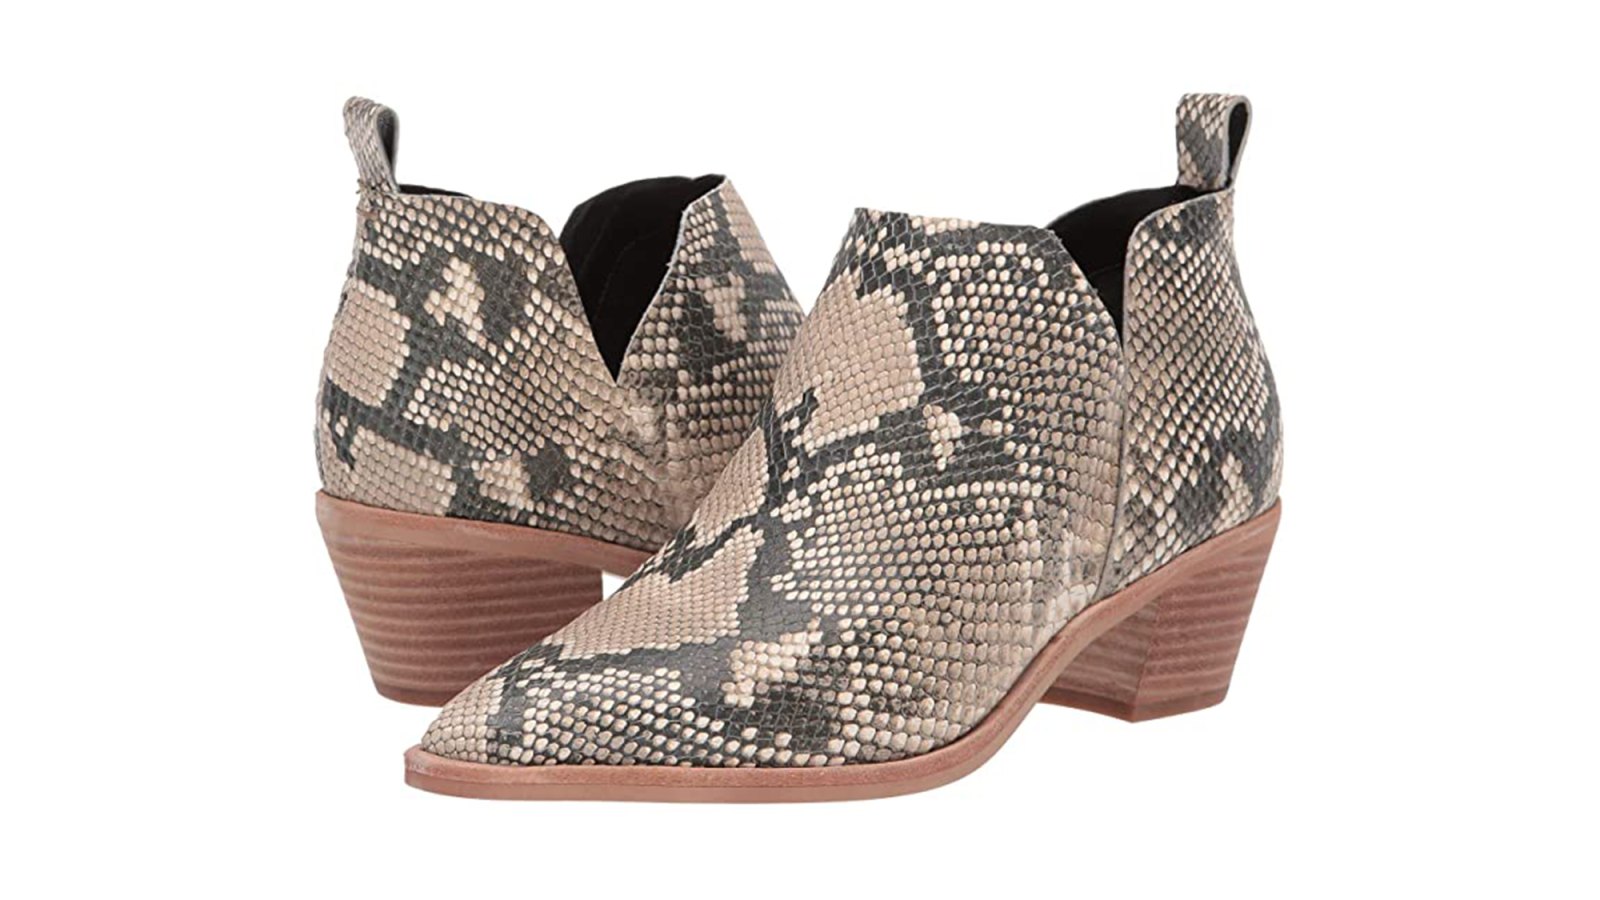 Dolce Vita Ultra Chic Booties Are on Sale for Up to 30% Off | Us Weekly